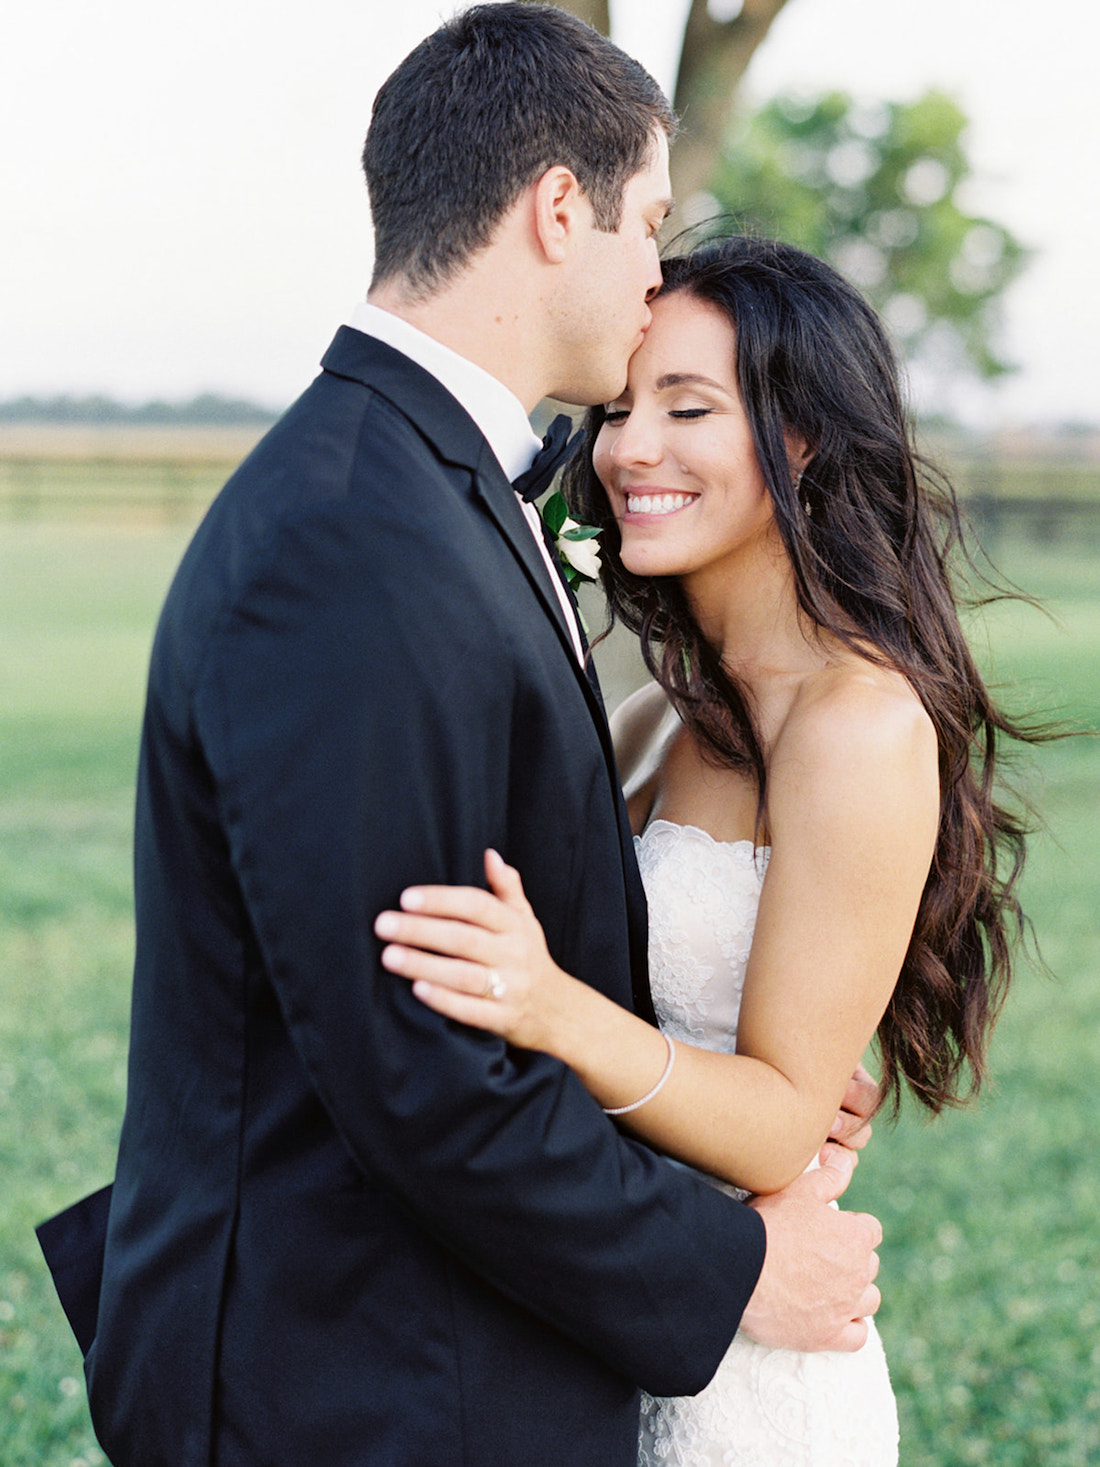 Groom kisses bride on the forehead as she smiles during their wedding held at the Dallas Arboretum, taken by Mackenzie Reiter